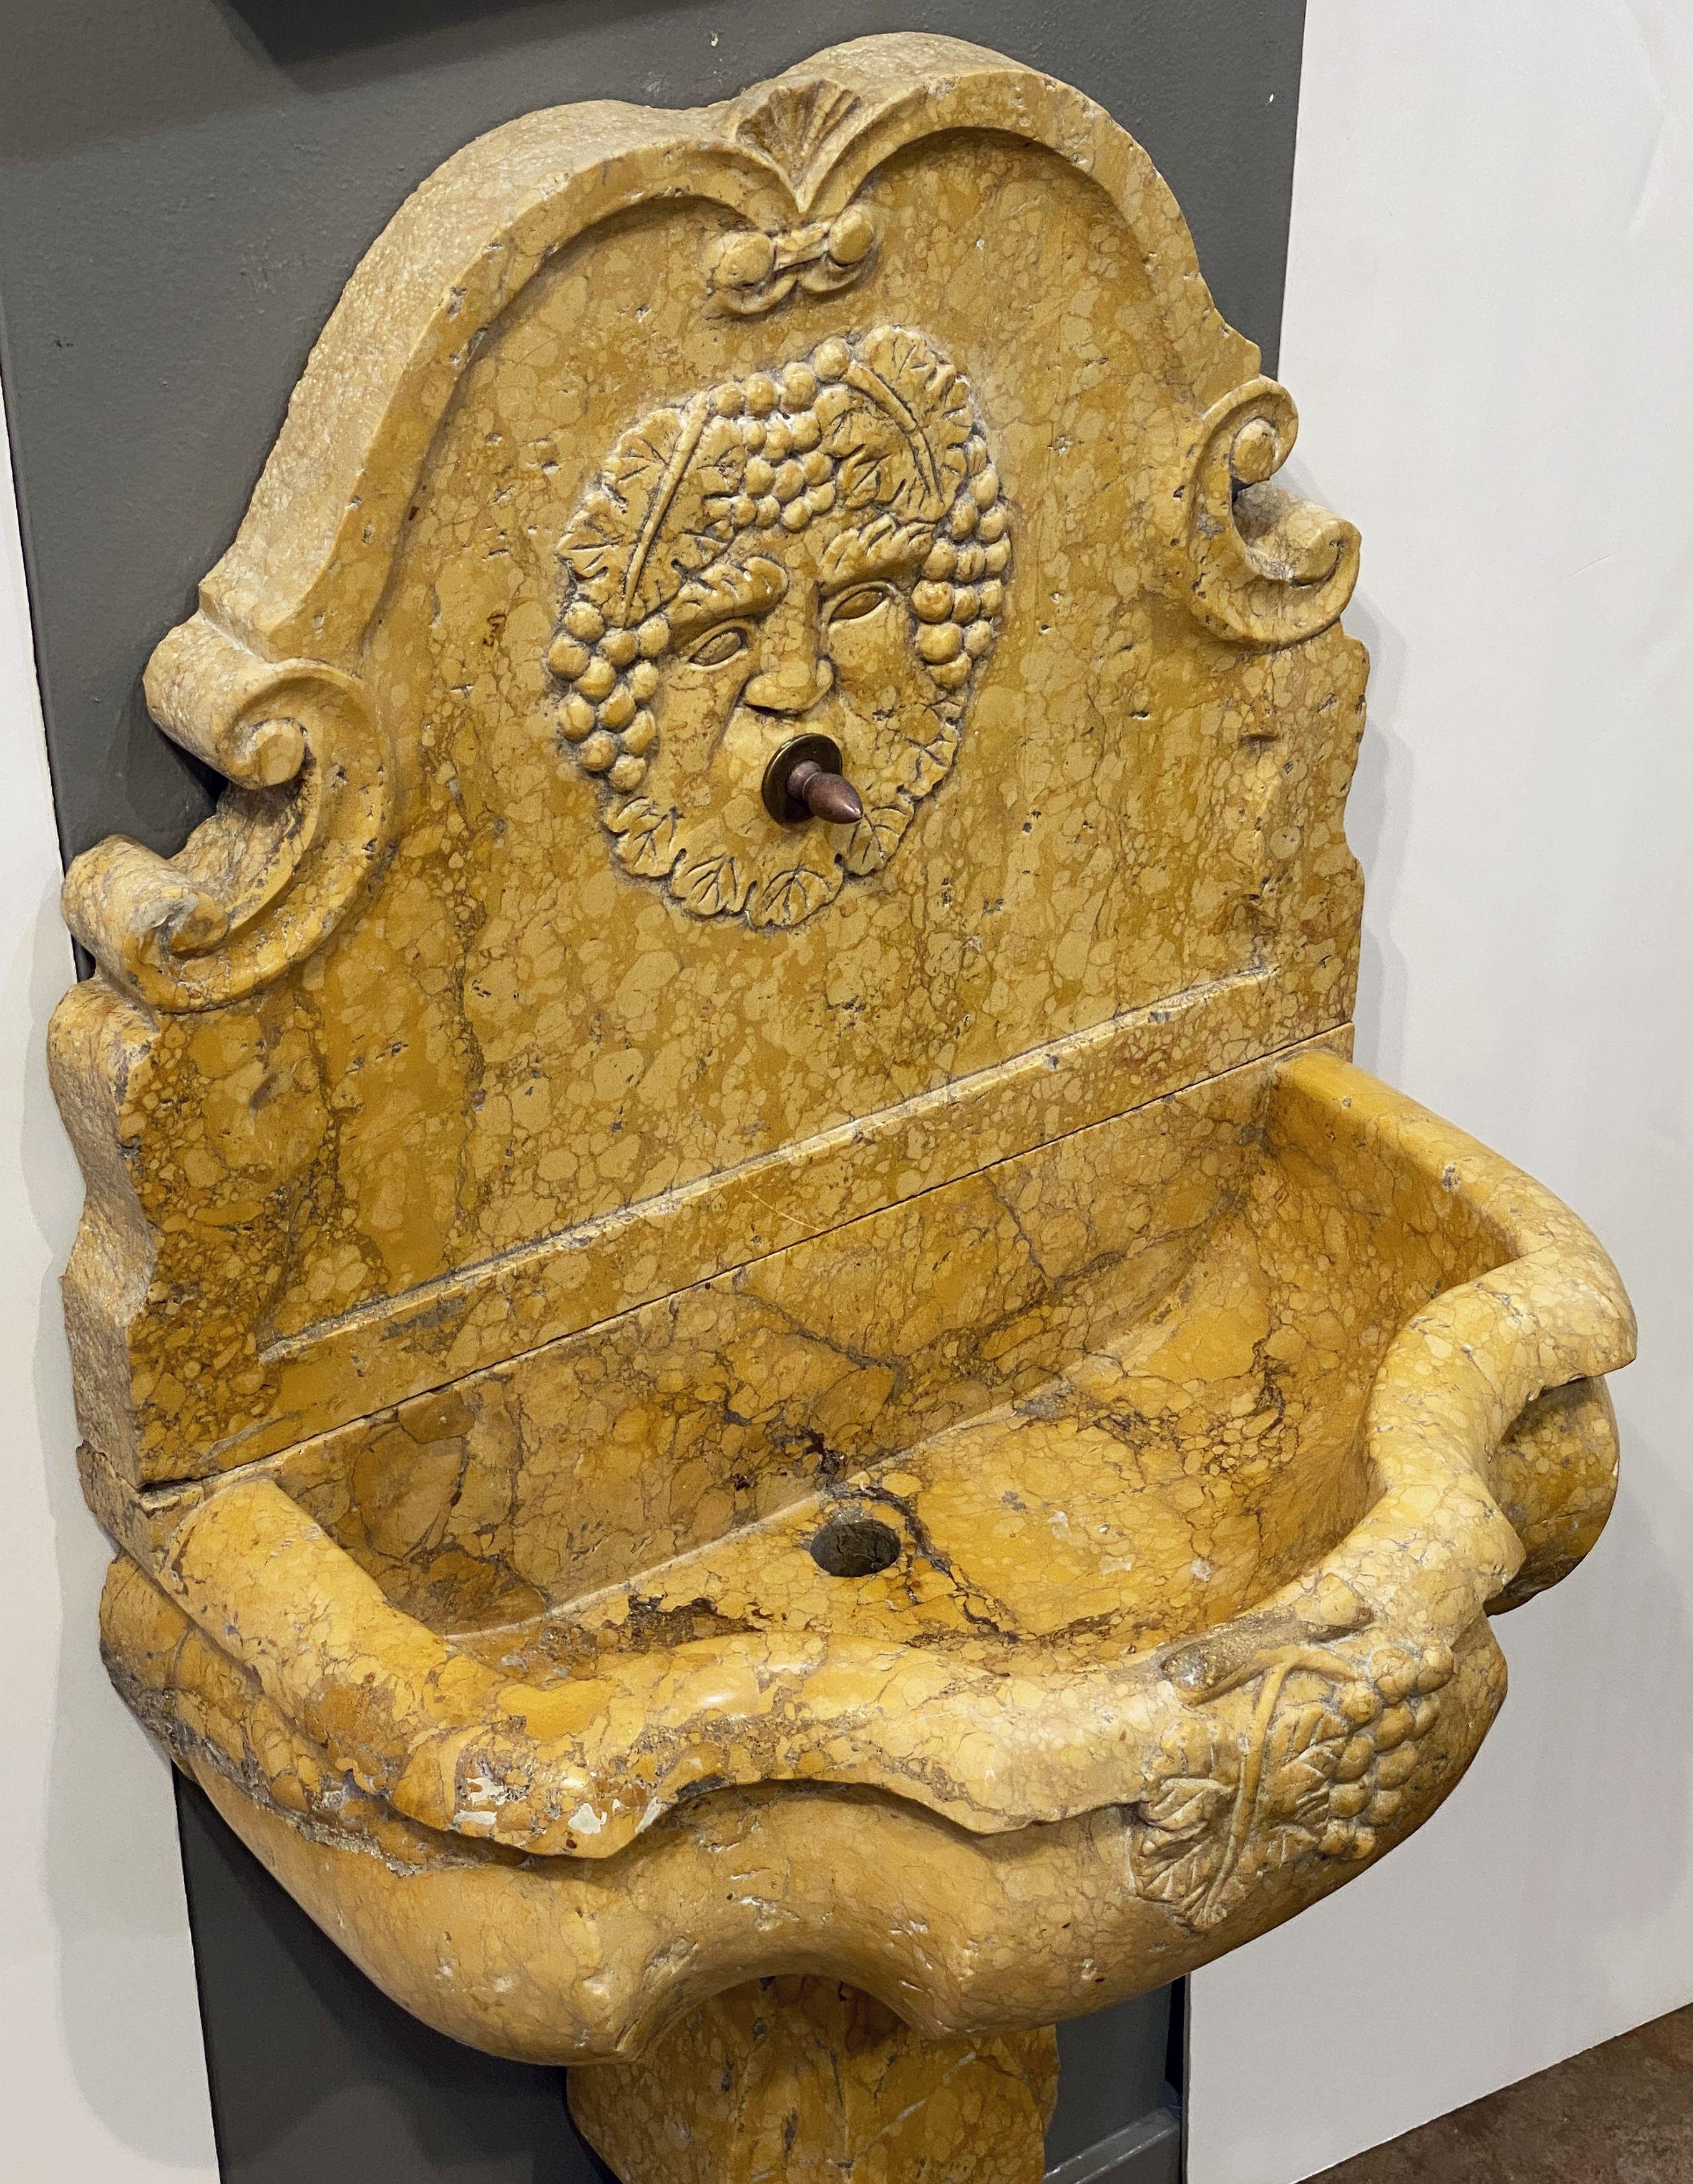 19th Century Wall Fountain of Carved Siena Marble with Bacchus or Dionysus Relief from Italy